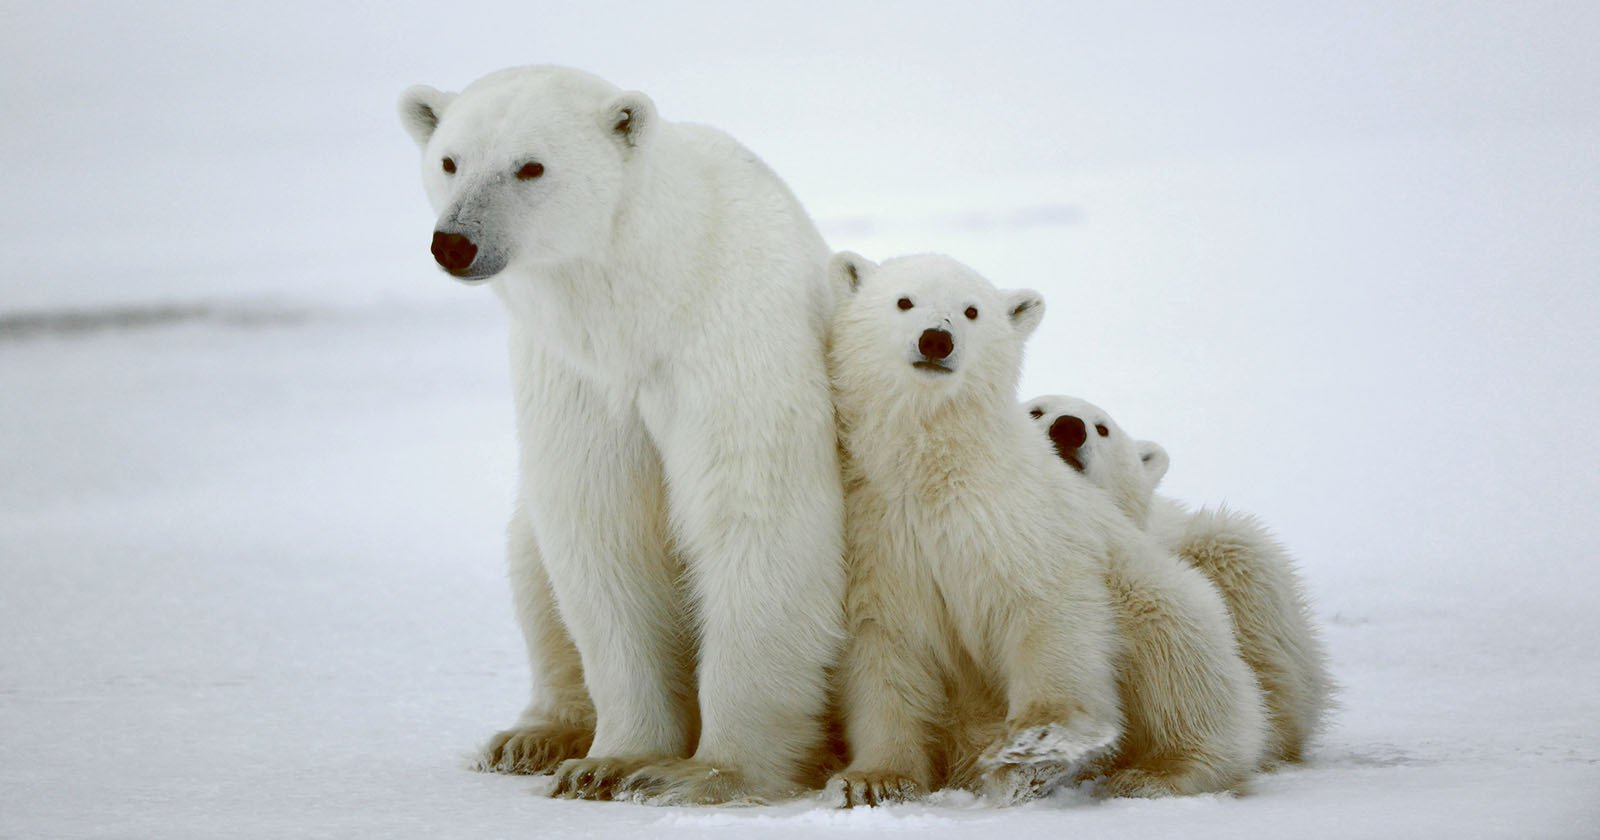 Polar Bear Photos Are Losing Their Power as Climate Change Visuals